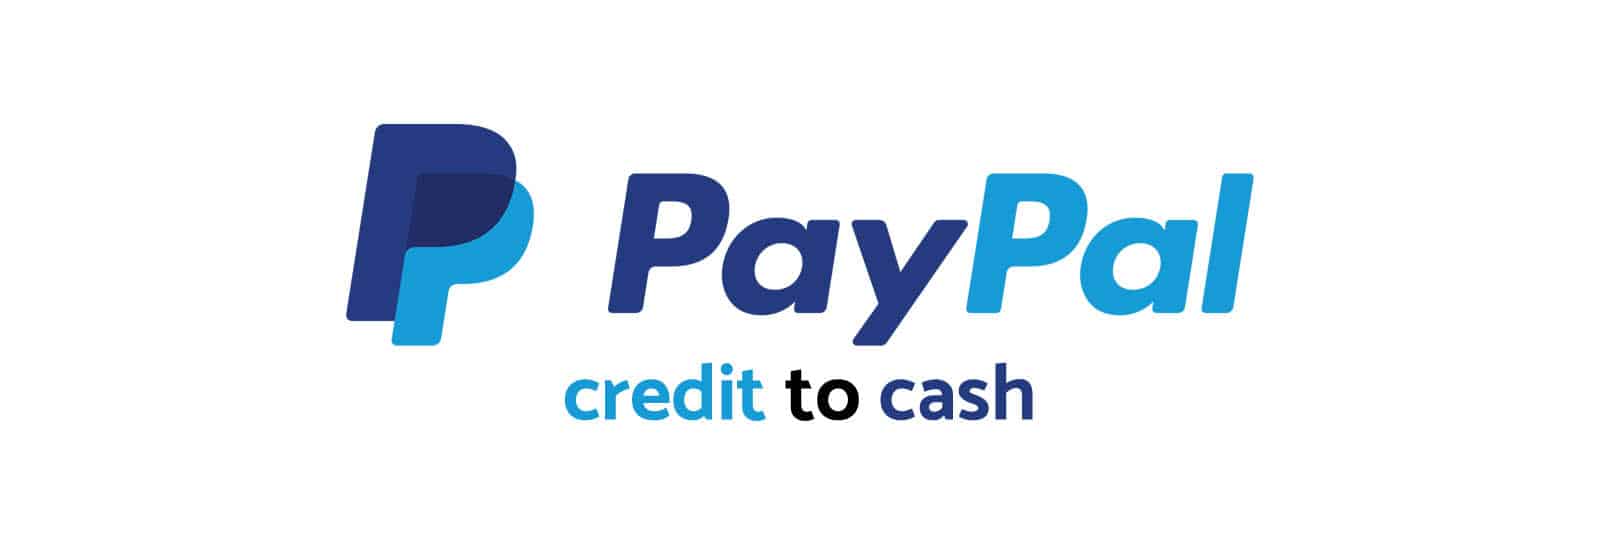 How do I withdraw money from my PayPal account? | PayPal GB